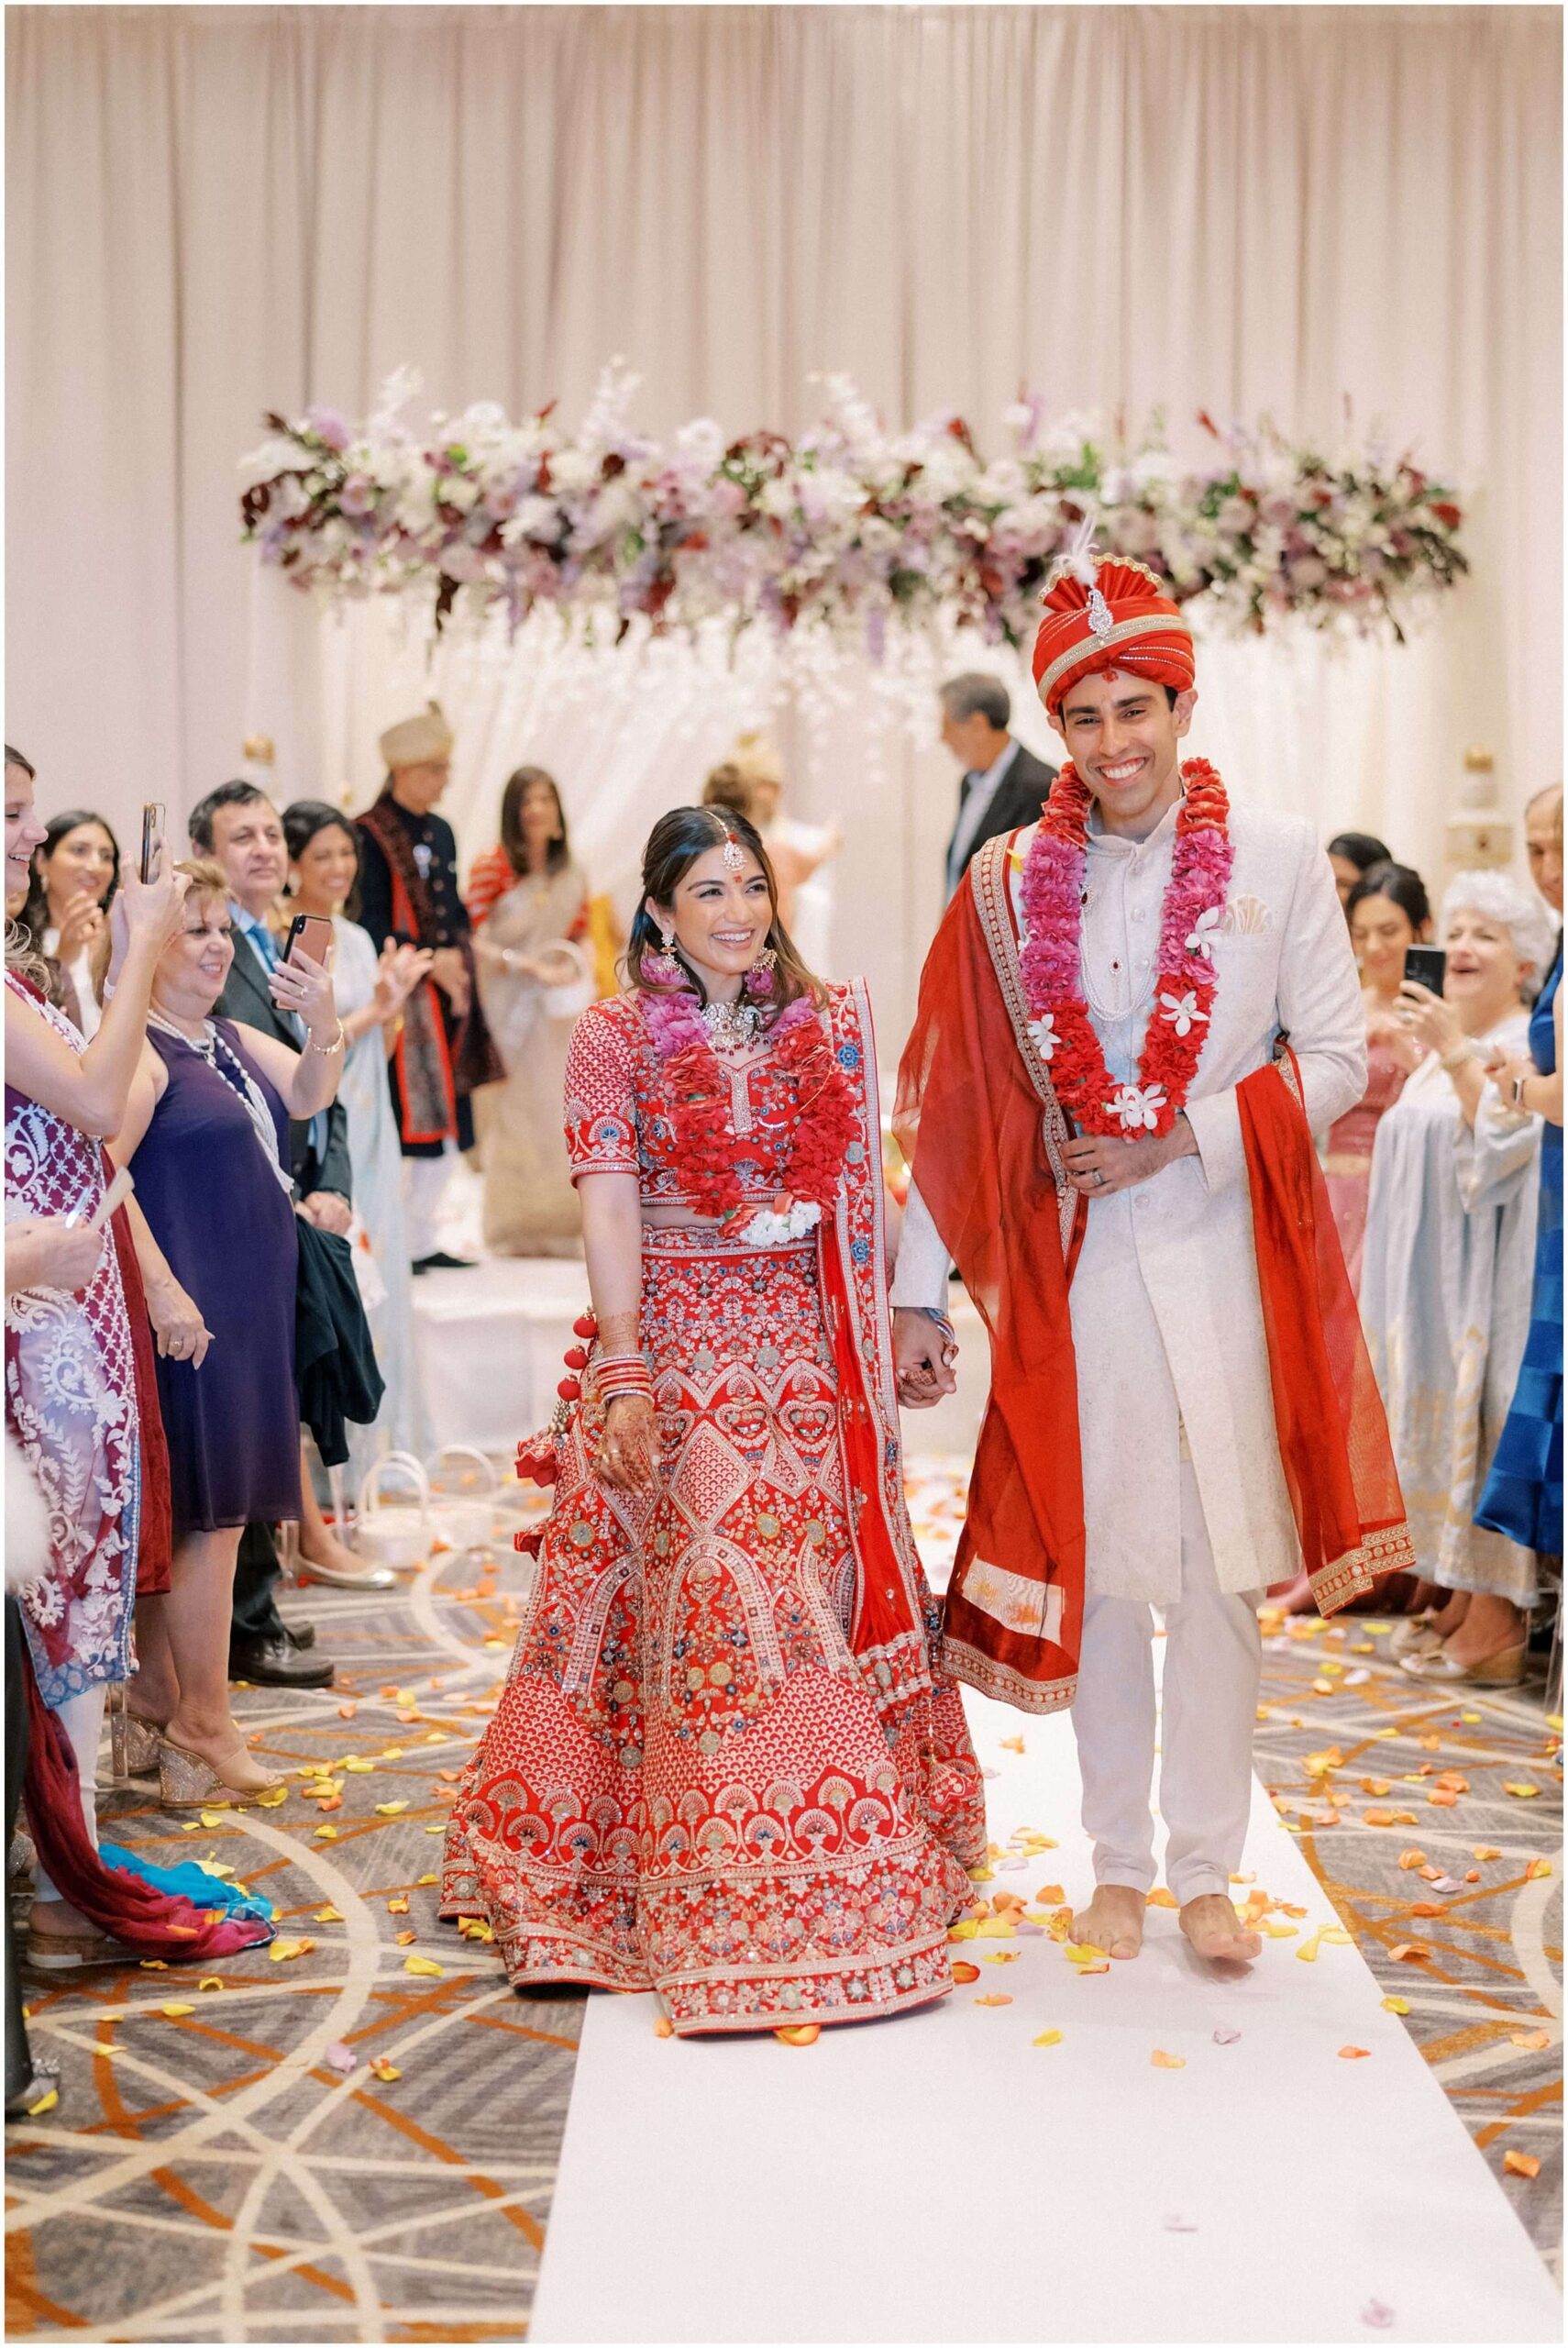 Hindu fusion wedding in Baltimore, MD. Photographed by luxury wedding photographer Winnie Dora Photography